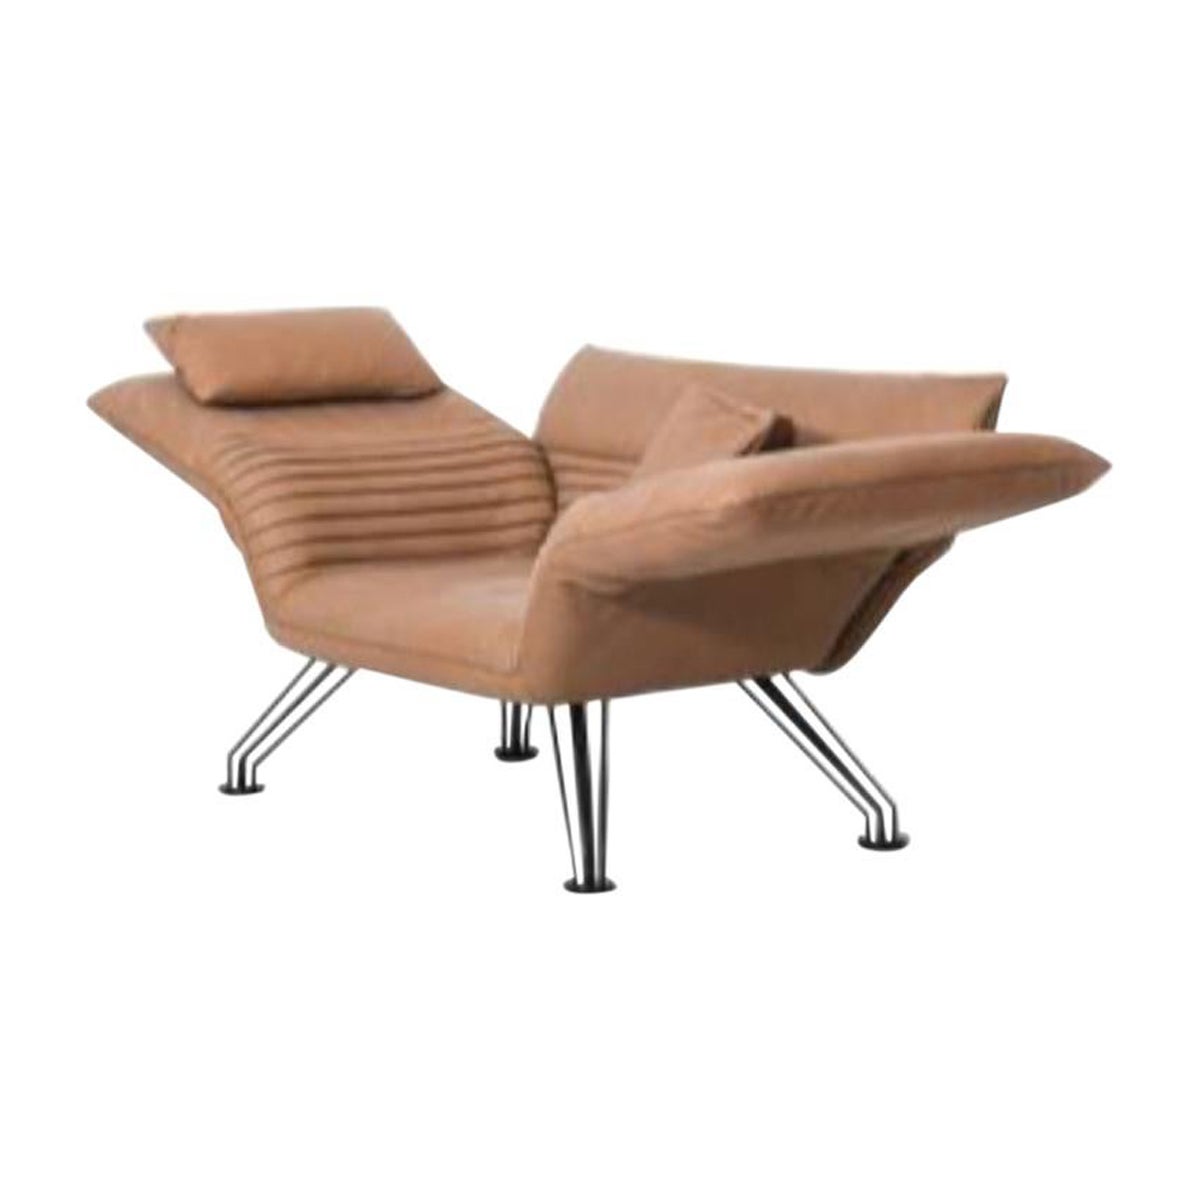 Set of DS-142 Multifunctional Lounge Chair with Cushions by De Sede